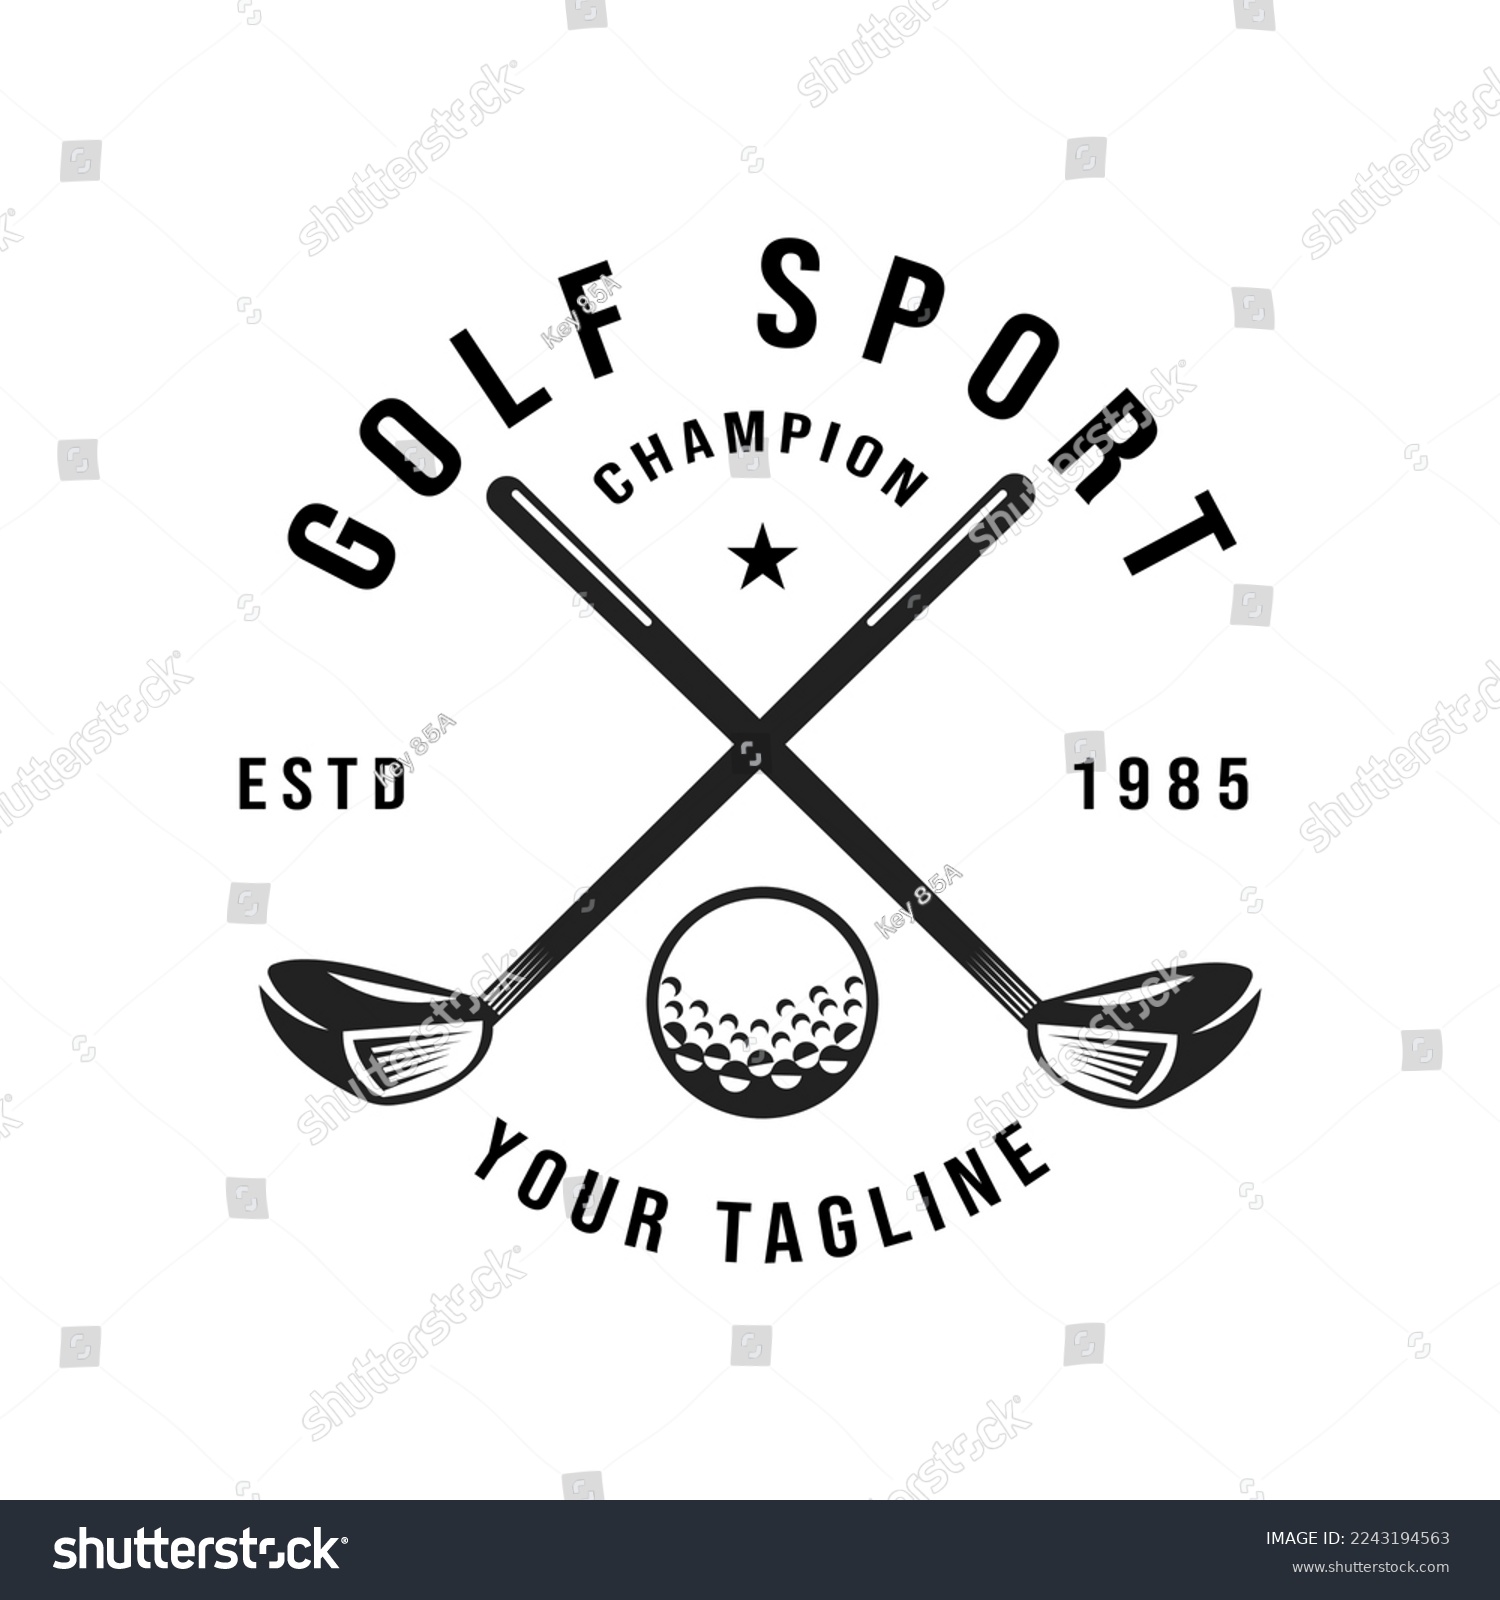 Retro vintage golf, professional golf ball logo template design, golf championship, badge or icon with crossed golf clubs and ball on tee. Vector illustration. symbol, icon #2243194563